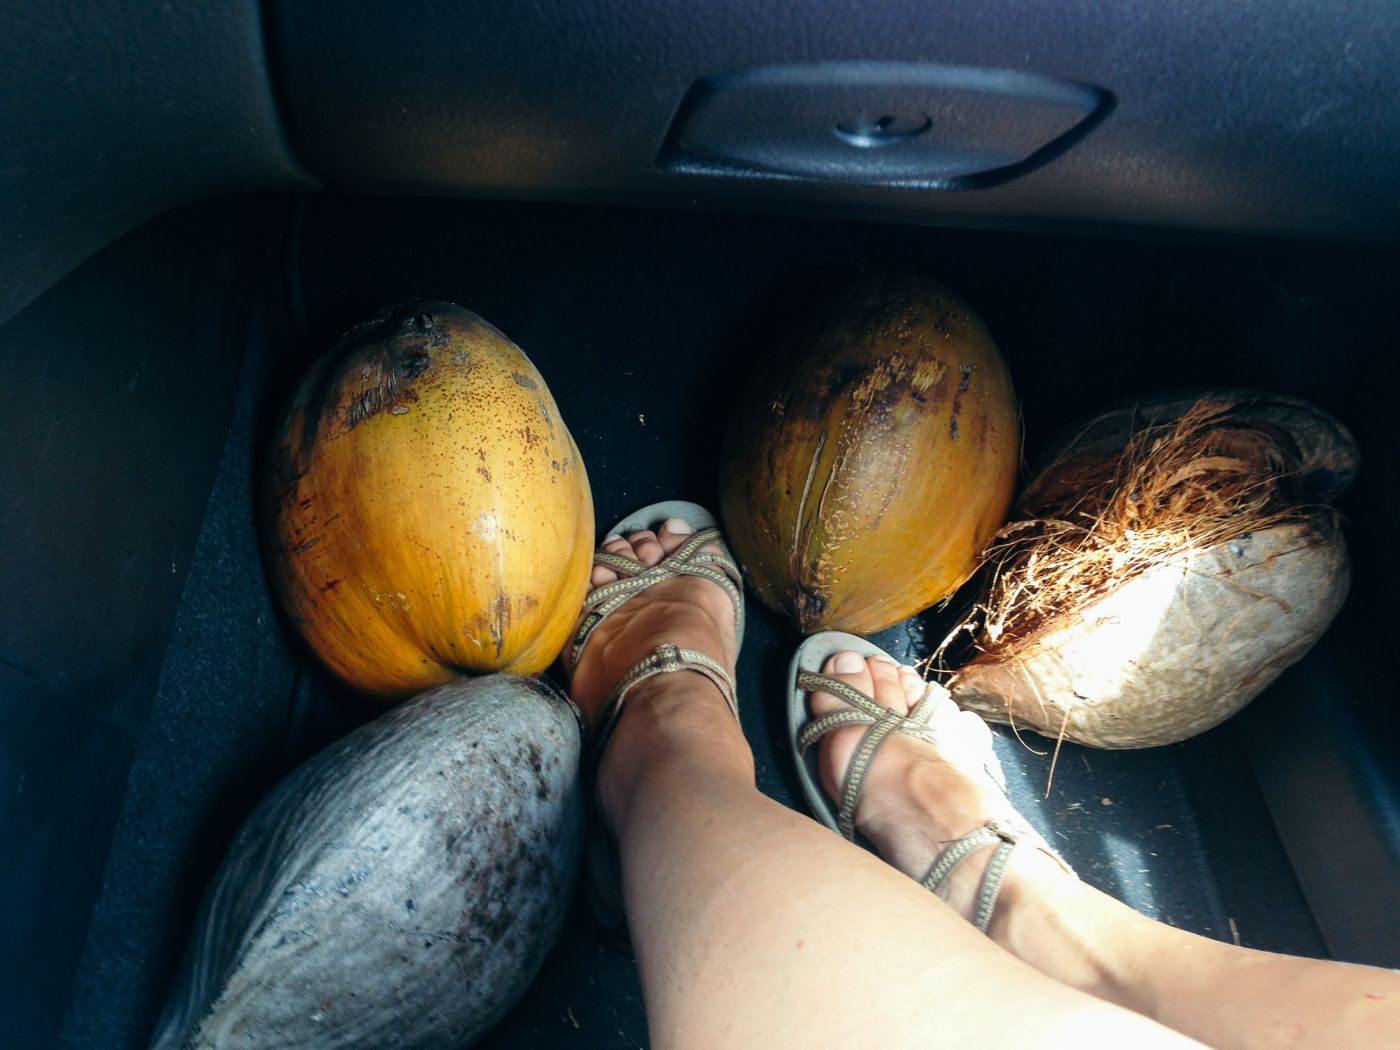 Coconuts at the feet in a car, Hawaii